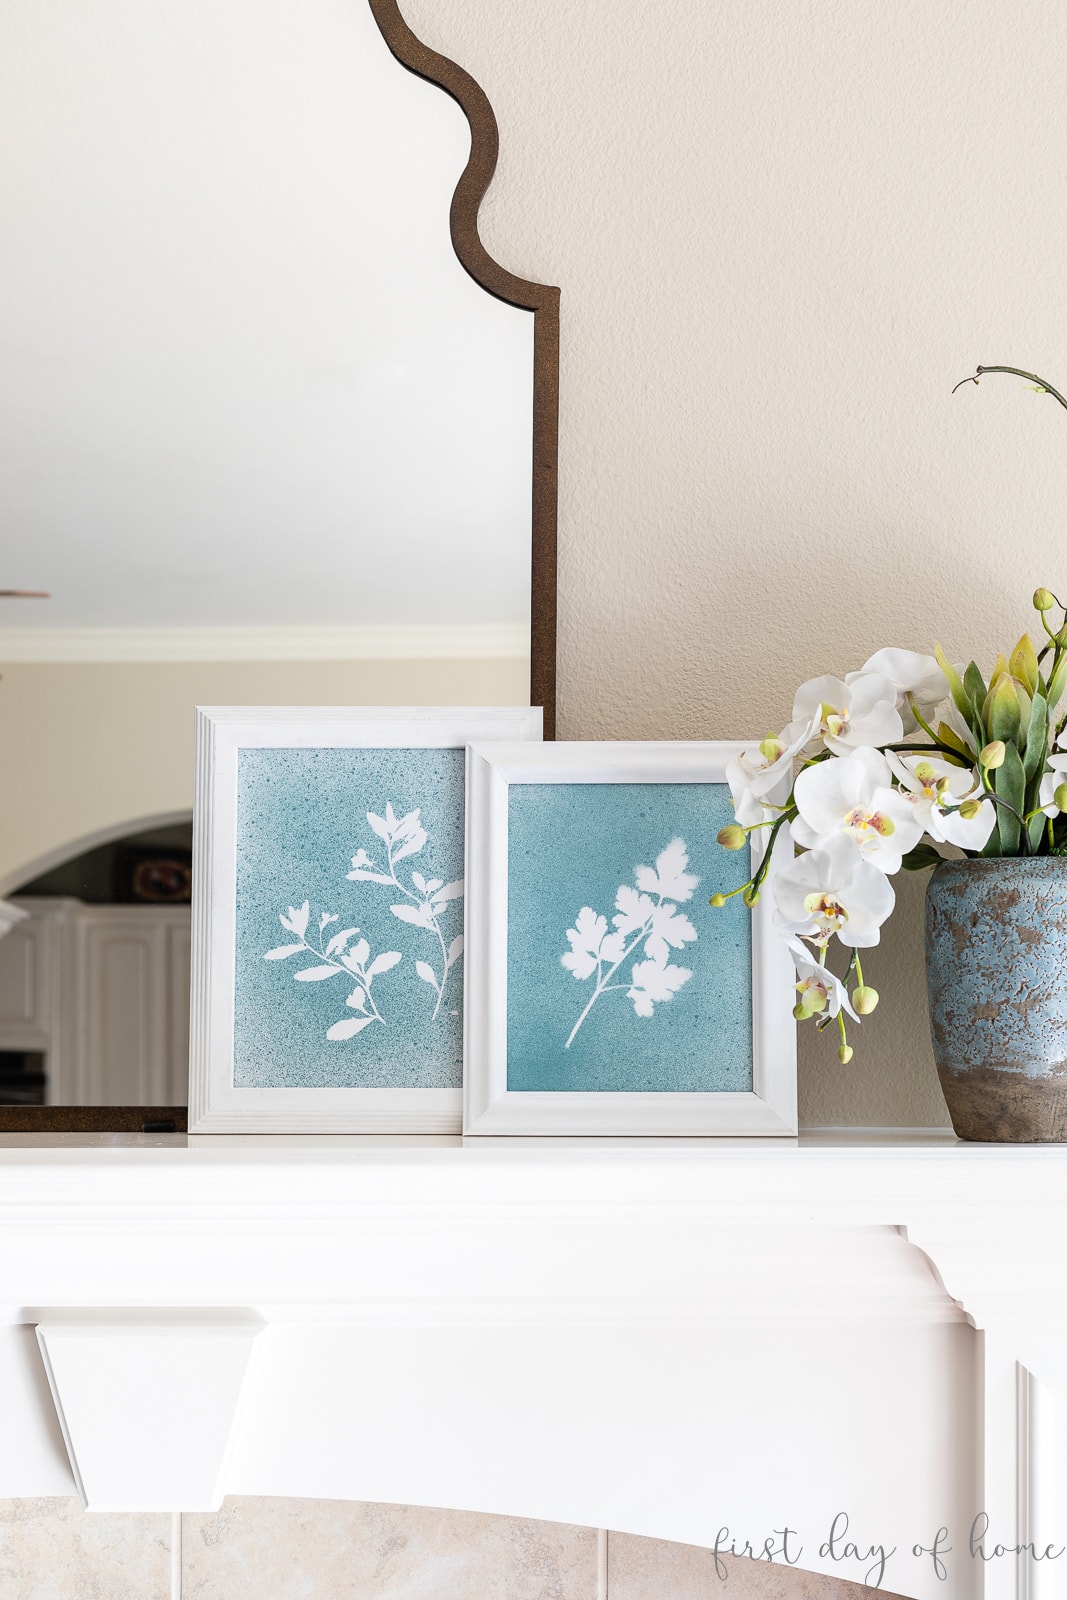 Pressed flower wall art shown in white frames next to faux floral arrangement on fireplace mantel.